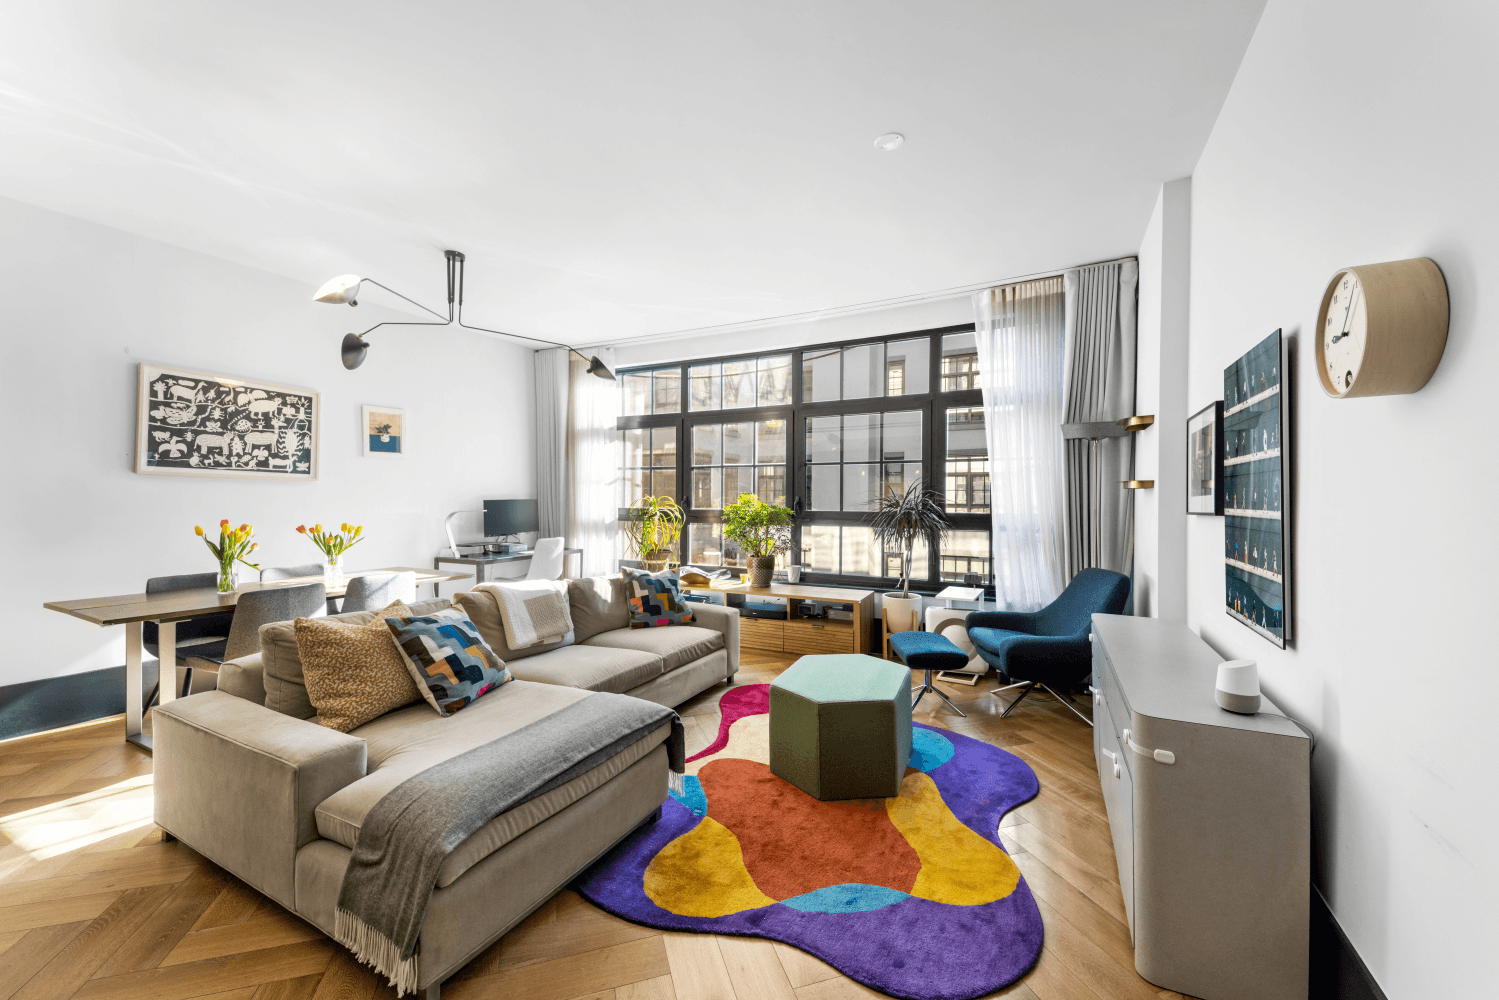 Welcome to 51 Jay Street 4L, an expansive two bedroom, two bathroom loft overlooking a serene, landscaped courtyard in the heart of DUMBO.